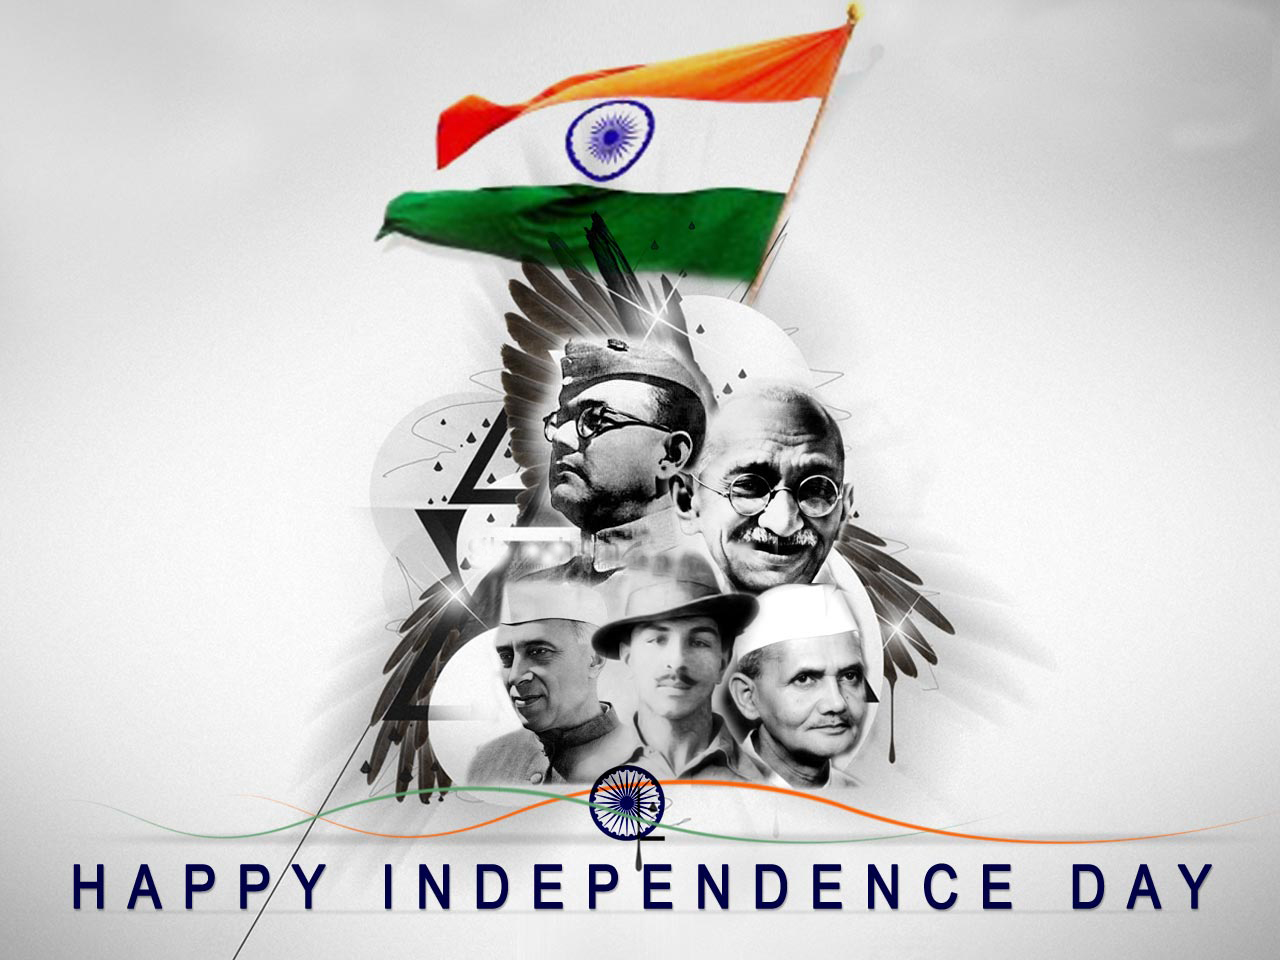 73 Independence Day India - HD Wallpaper 